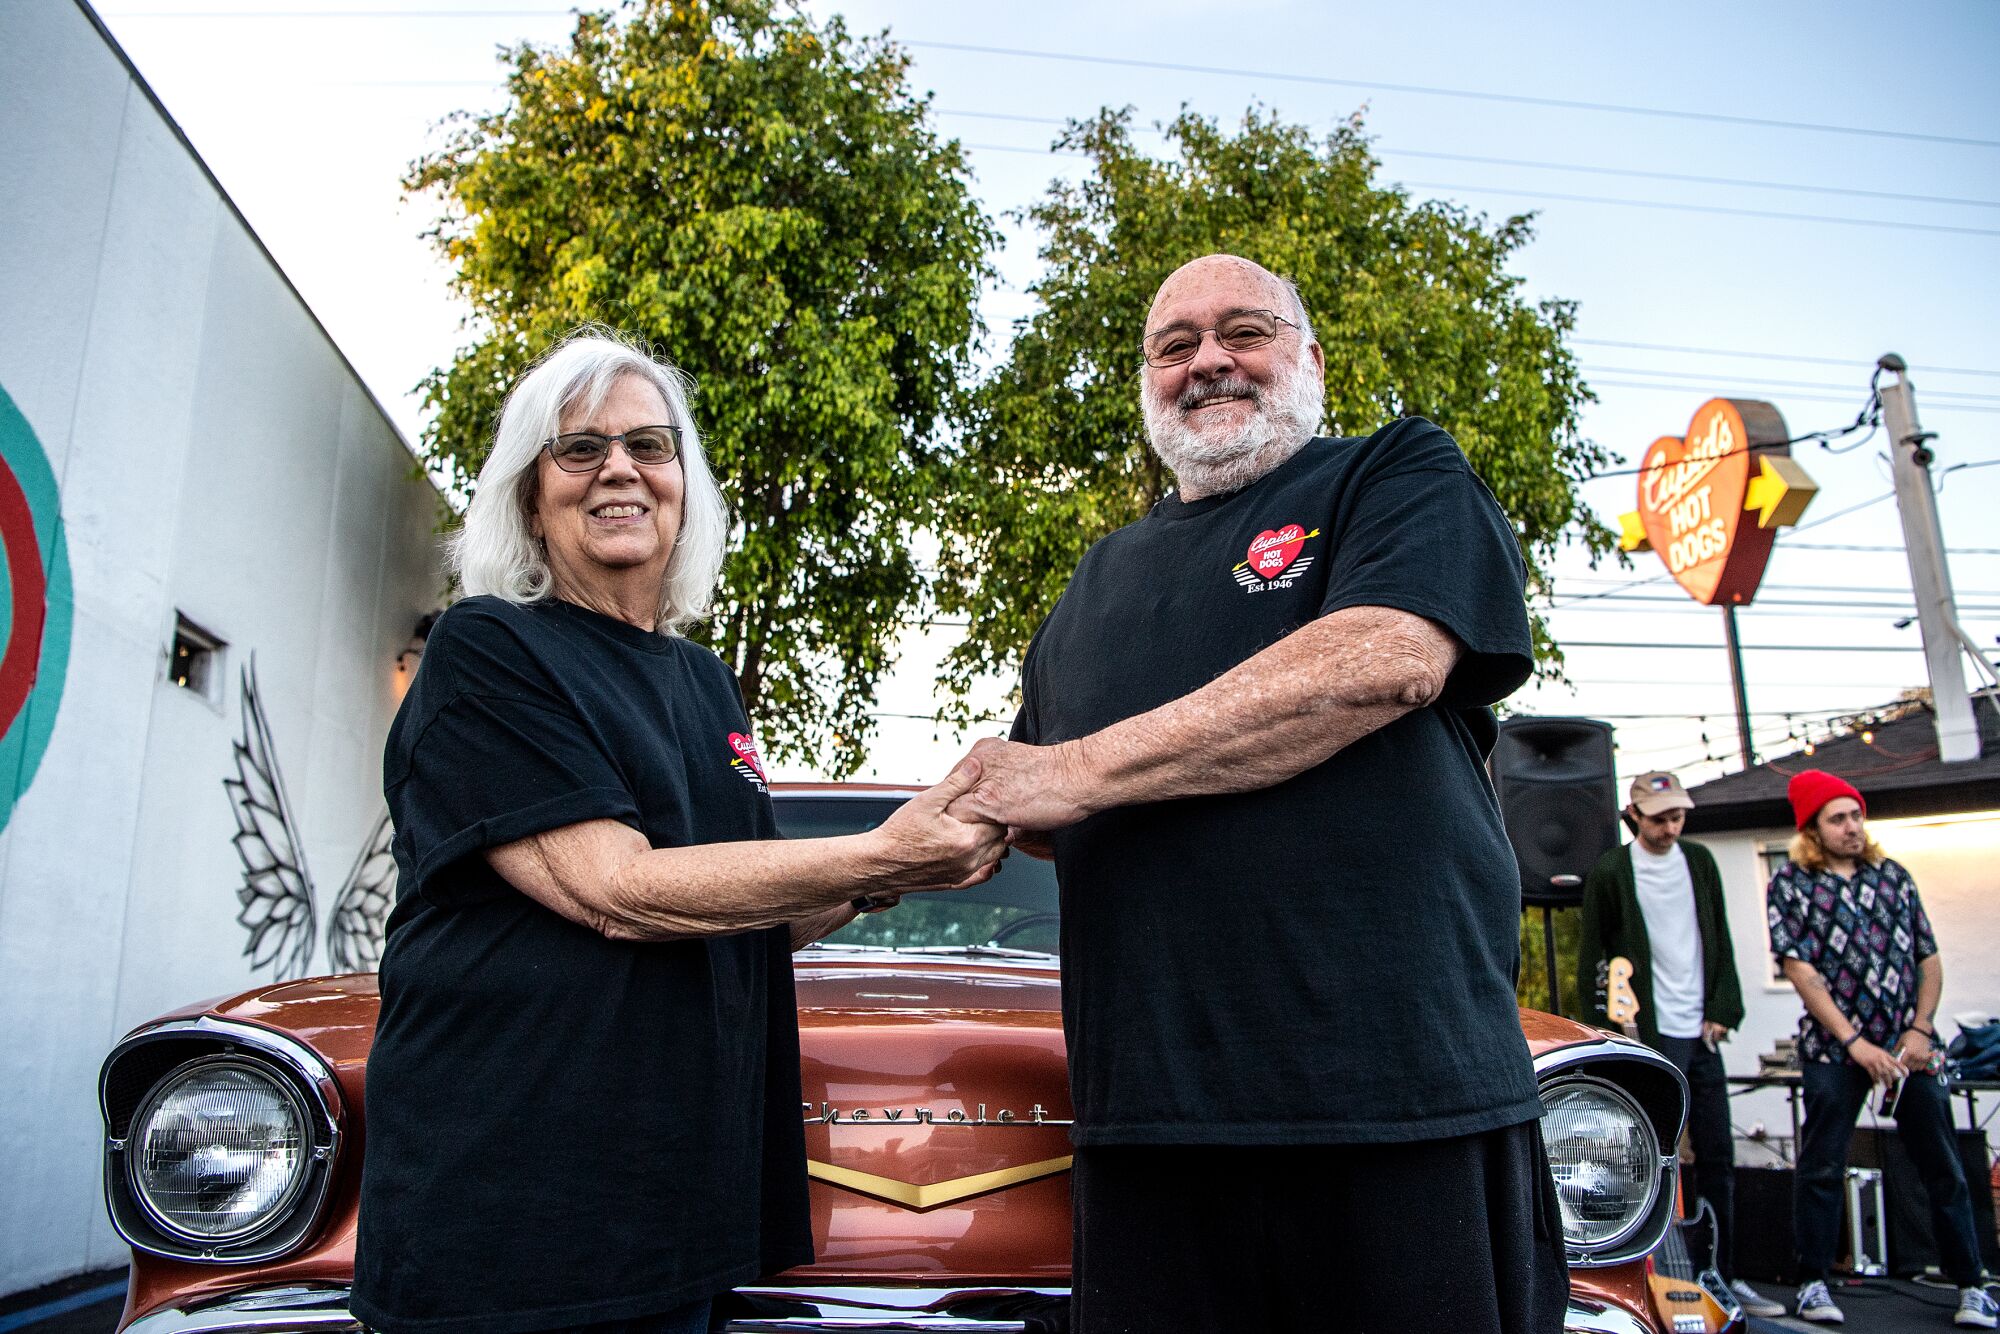 Jeanie and Tony Pinto pose next to their 1957 Chevy Bel Air